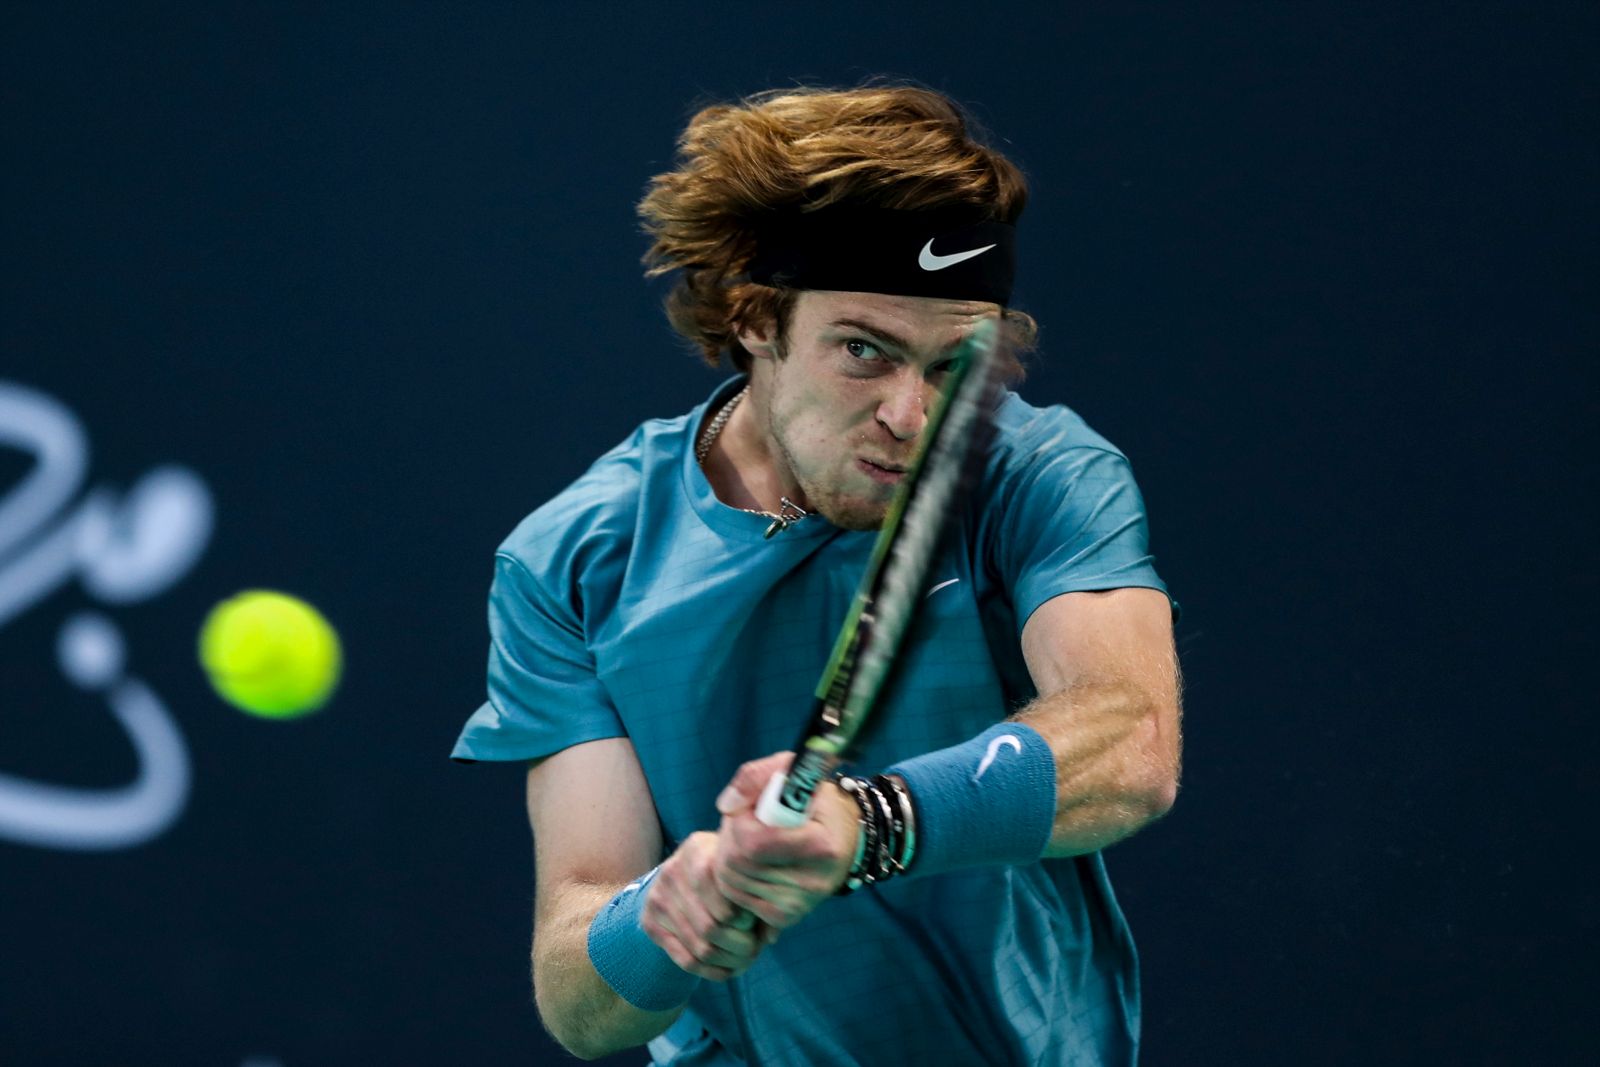 epa09646813 Andrey Rublev of Russia in action during the semifinal match against Denis Shapovalov of Canada at the Mubadala World Tennis Championship 2021 in Abu Dhabi, United Arab Emirates, 17 December 2021.  EPA/ALI HAIDER